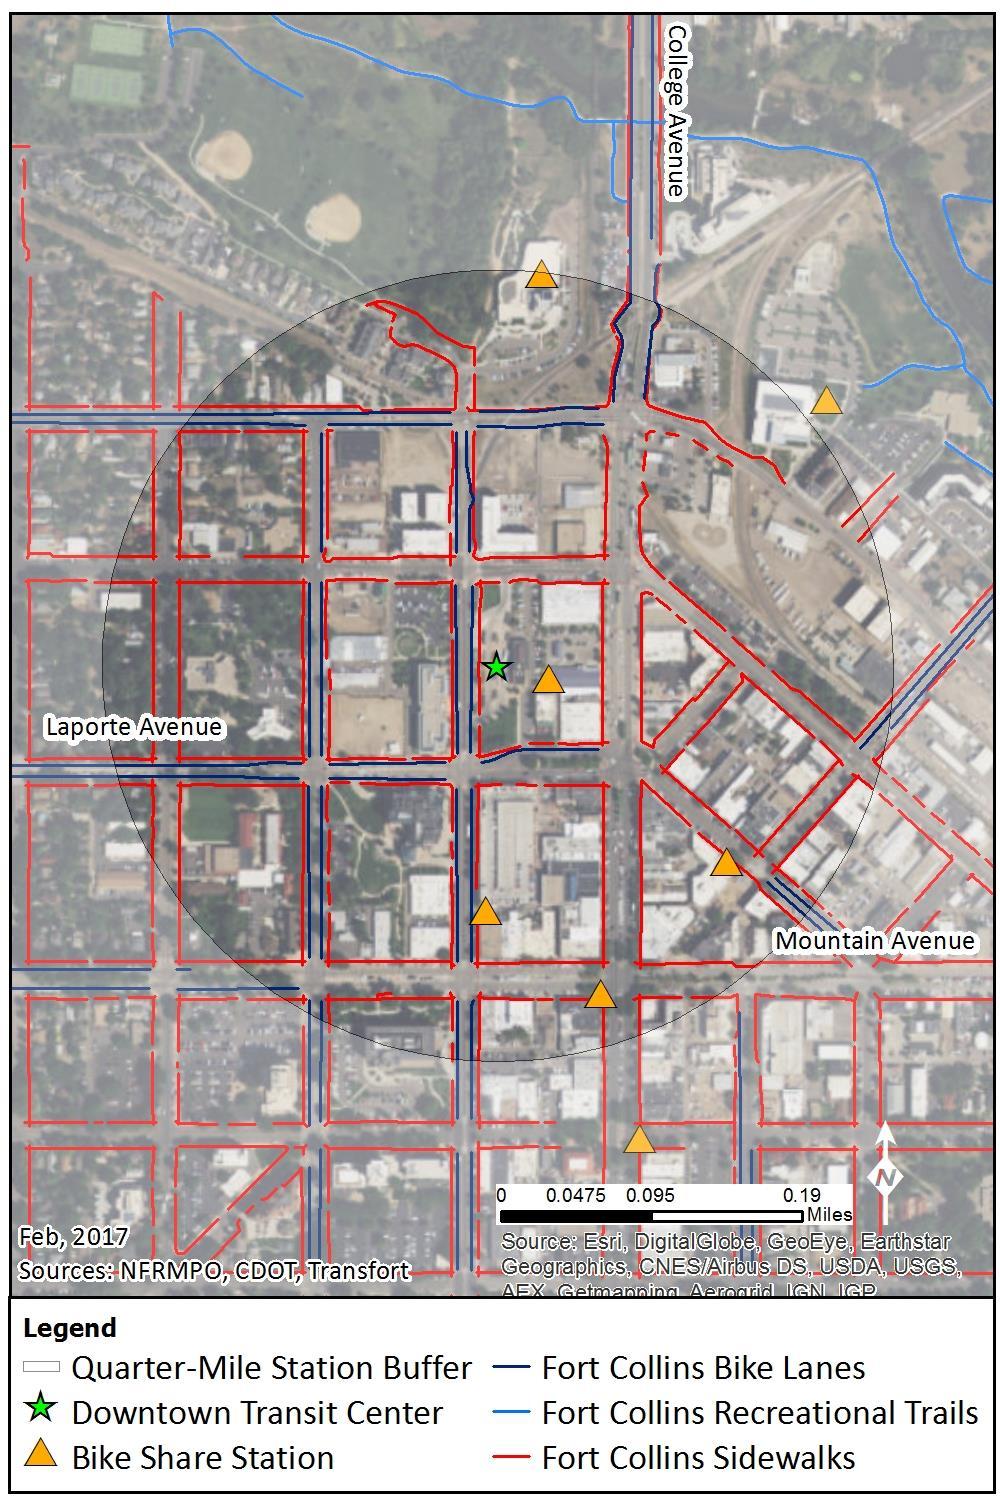 Figure 3-5 shows the density of sidewalks, bicycle sharing stations, and bicycle infrastructure available to users of the DTC. Sidewalks are provided on all major and side streets.